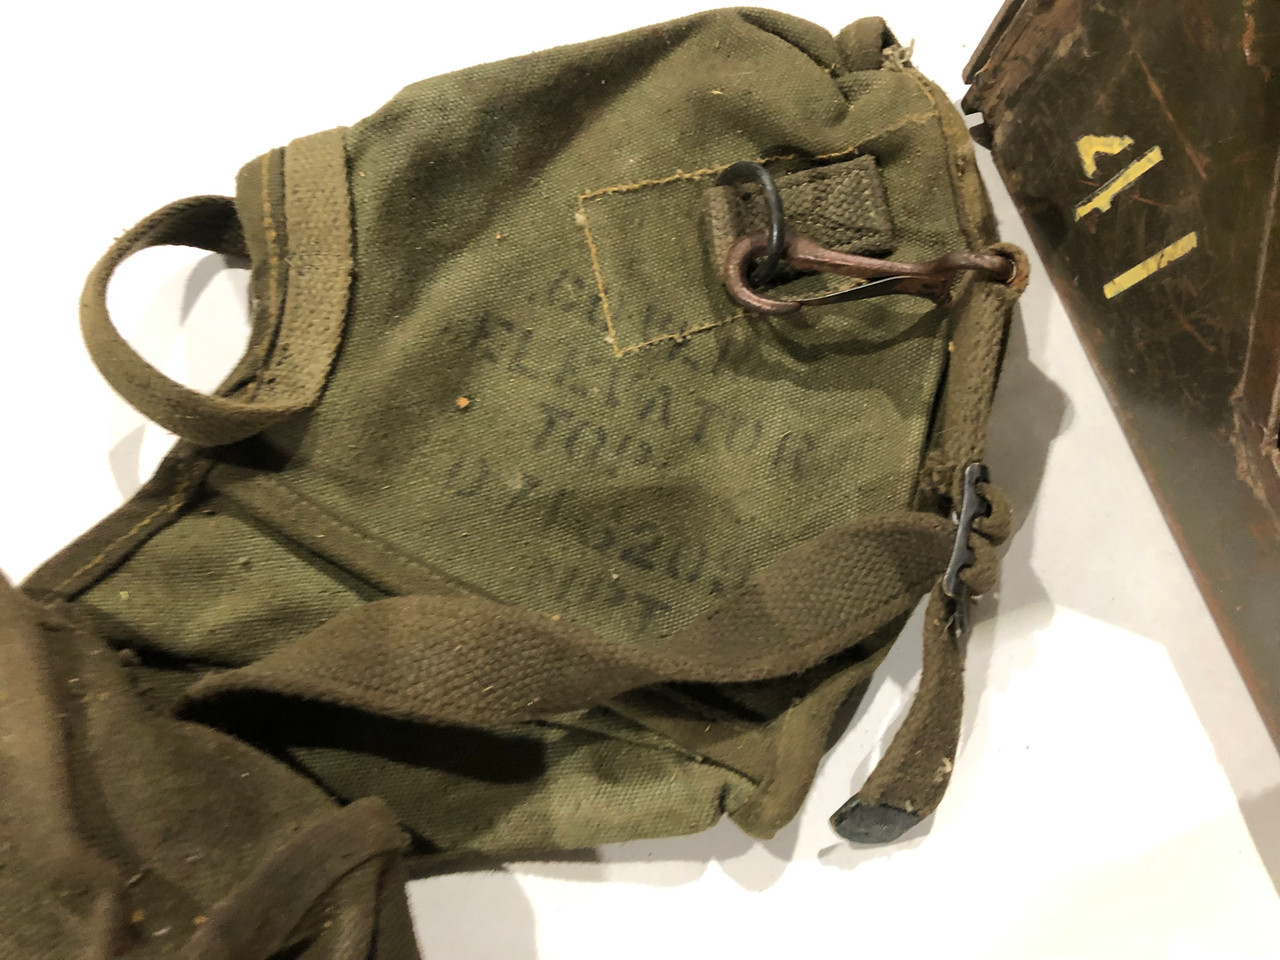 Lot 4: Browning M2HB Accessories and Covers